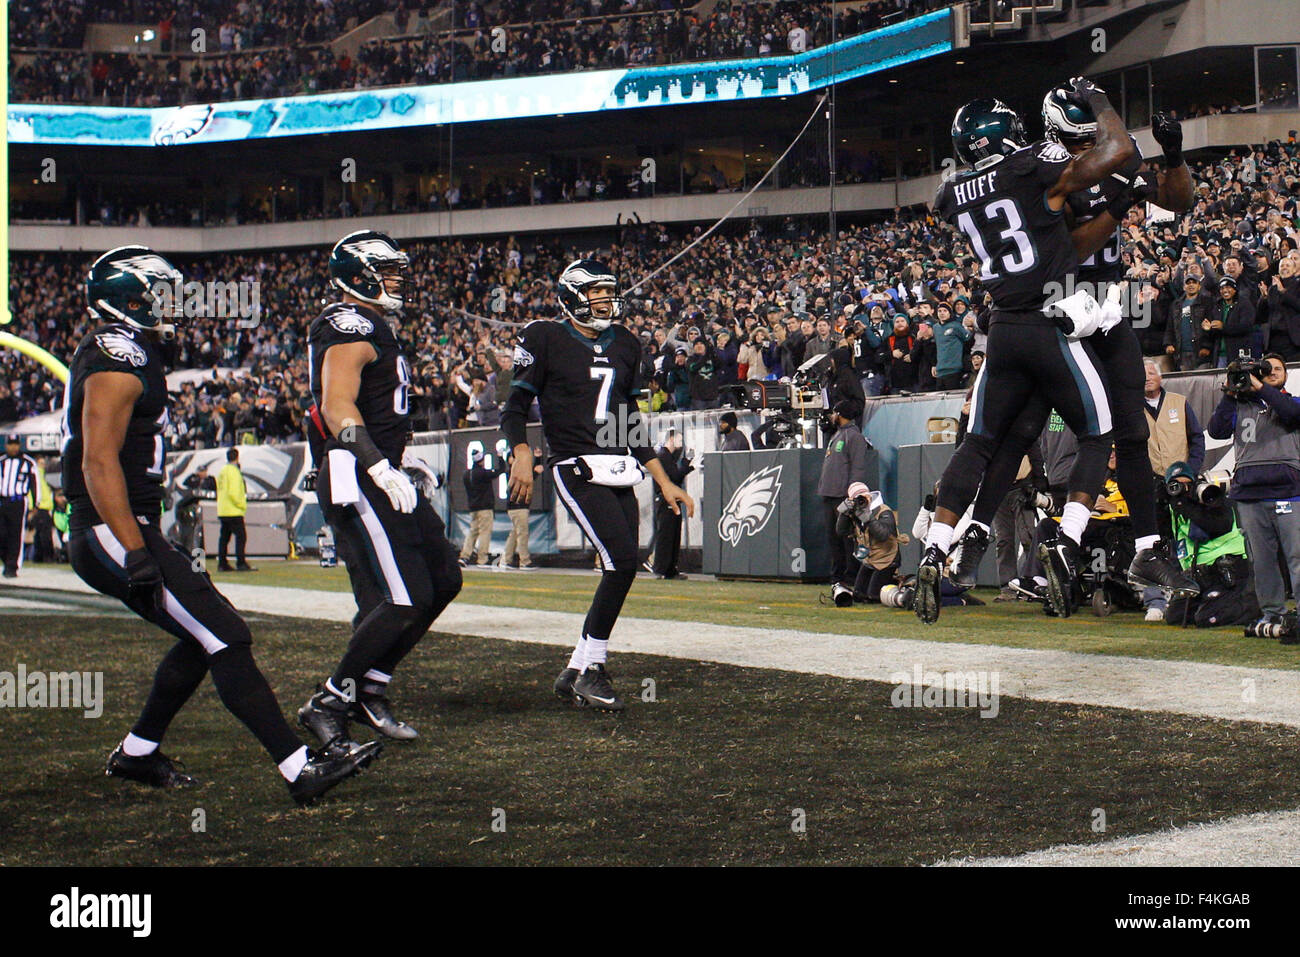 Philadelphia, Pennsylvania, USA. 19th Oct, 2015. Philadelphia Eagles running back DeMarco Murray (29) celebrates his touchdown run with Philadelphia Eagles wide receiver Josh Huff (13) during the NFL game between the New York Giants and the Philadelphia Eagles at Lincoln Financial Field in Philadelphia, Pennsylvania. The Philadelphia Eagles won 27-7. Christopher Szagola/CSM/Alamy Live News Stock Photo